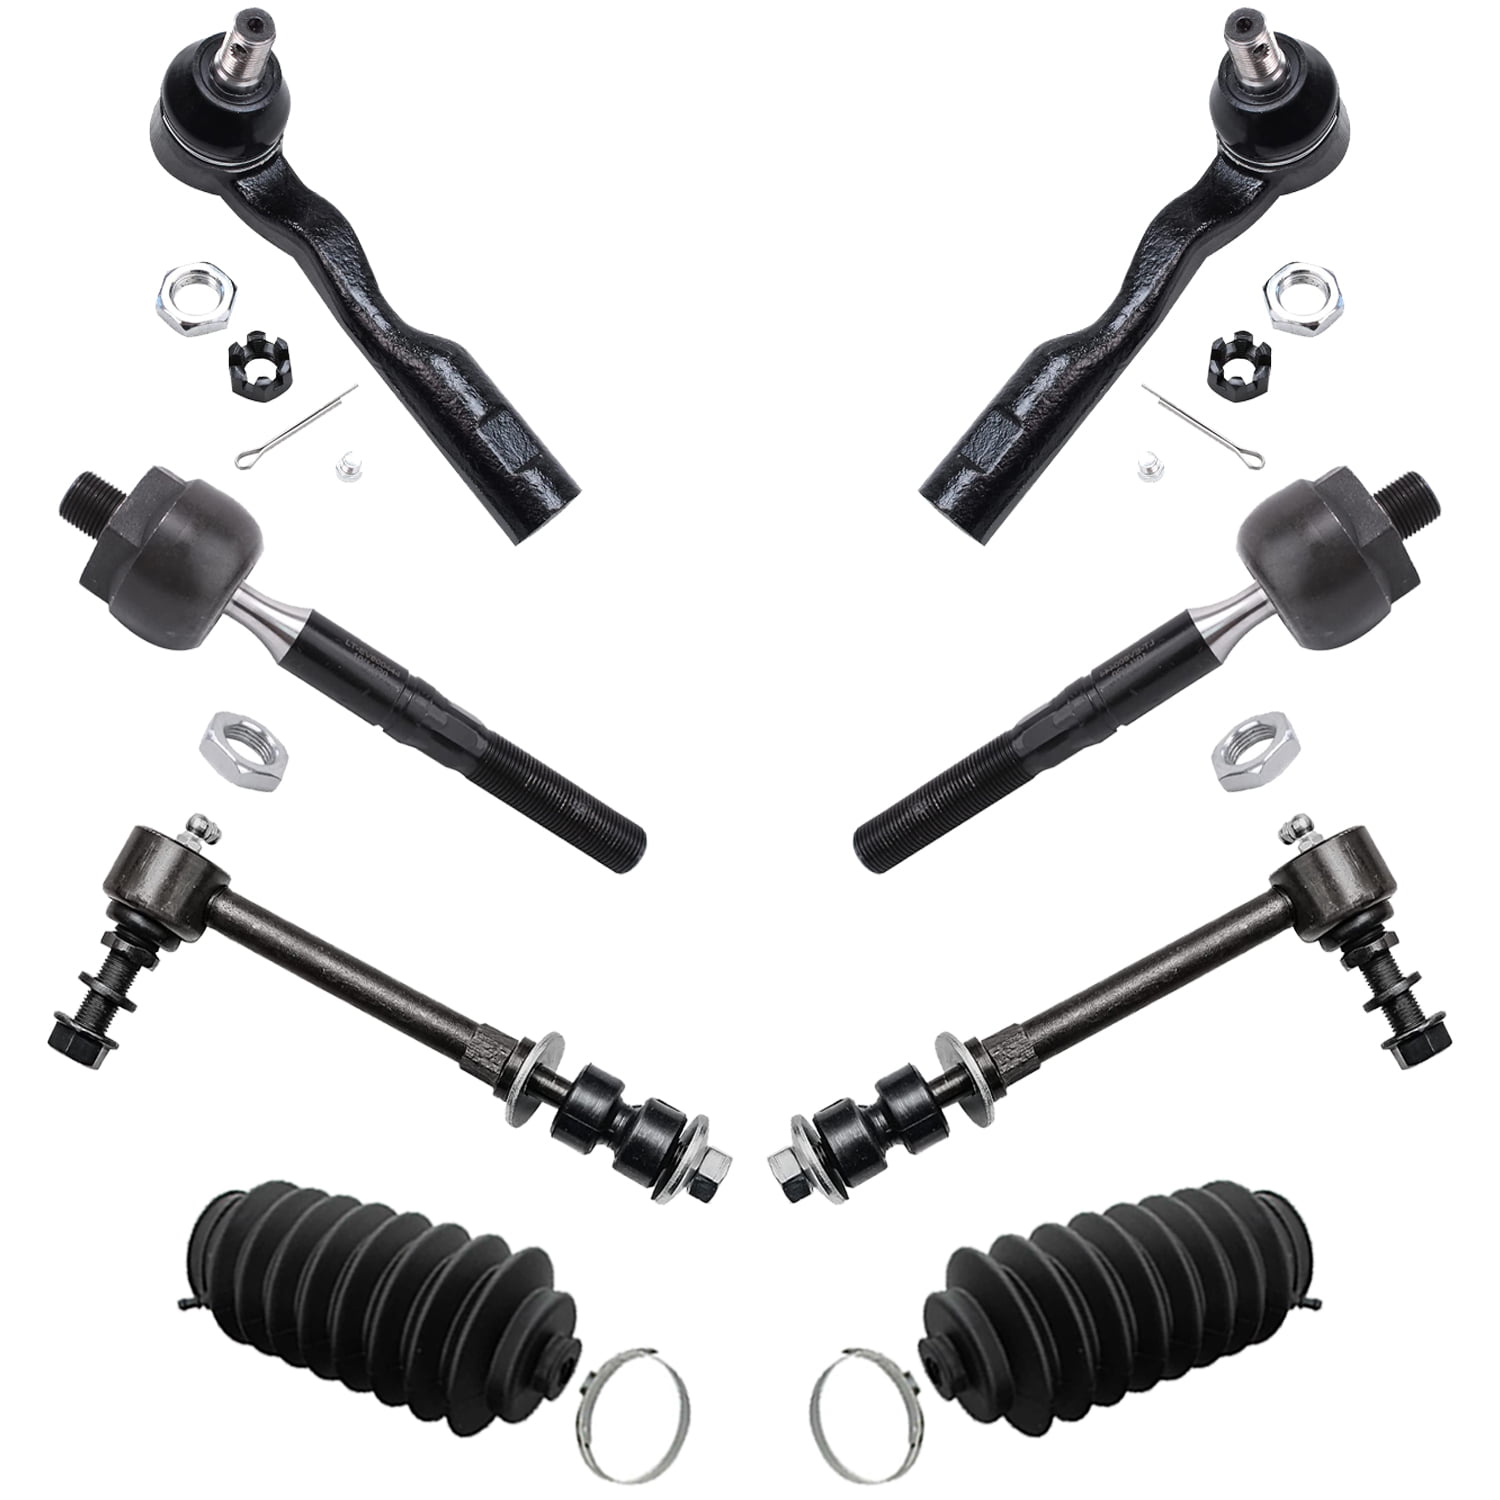 Detroit Axle Replacement for Nissan Altima Maxima Front Rear Sway Bar Links 8pc Set Inner Outer Tie Rods 